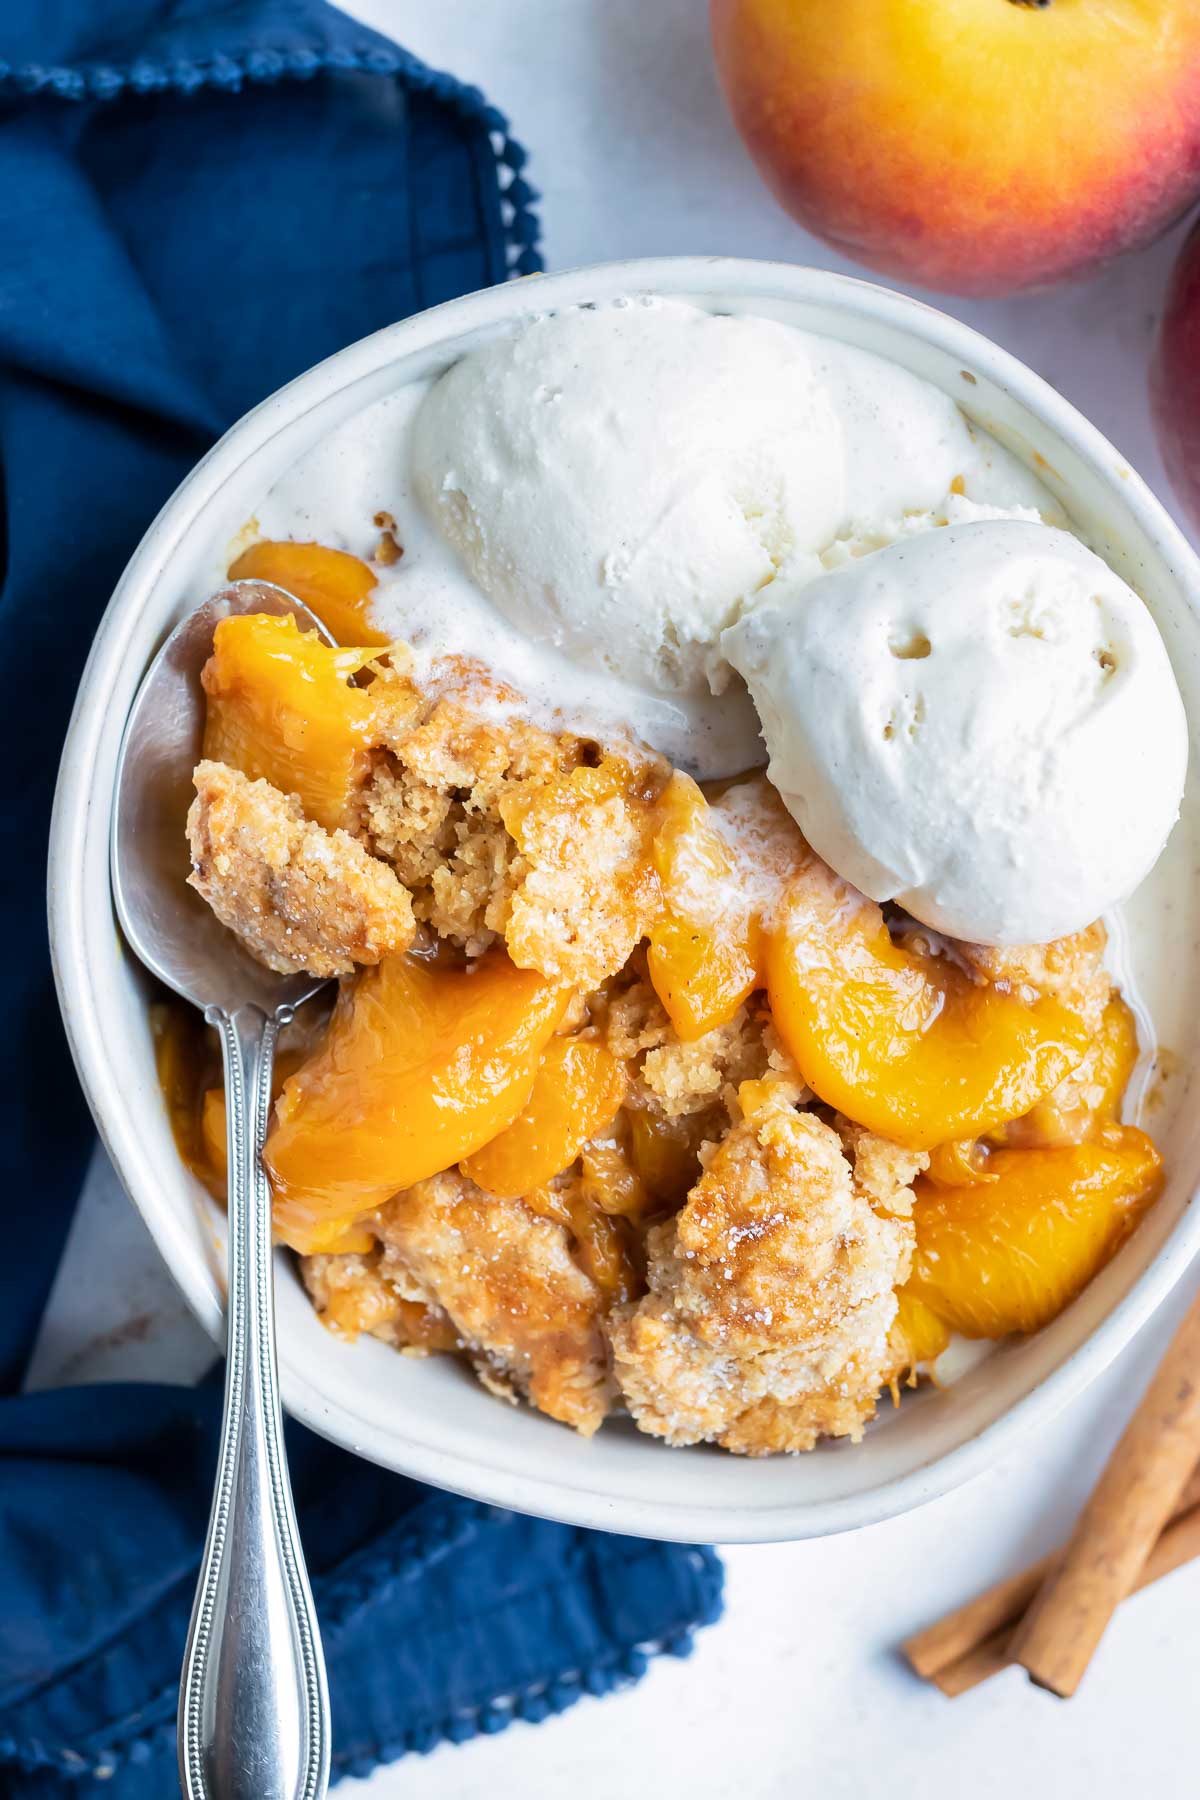 A metal spoon is picking up sweet, warm peaches and flakey cobbler crust of a homemade peach cobbler topped with ice-cream in a bowl.